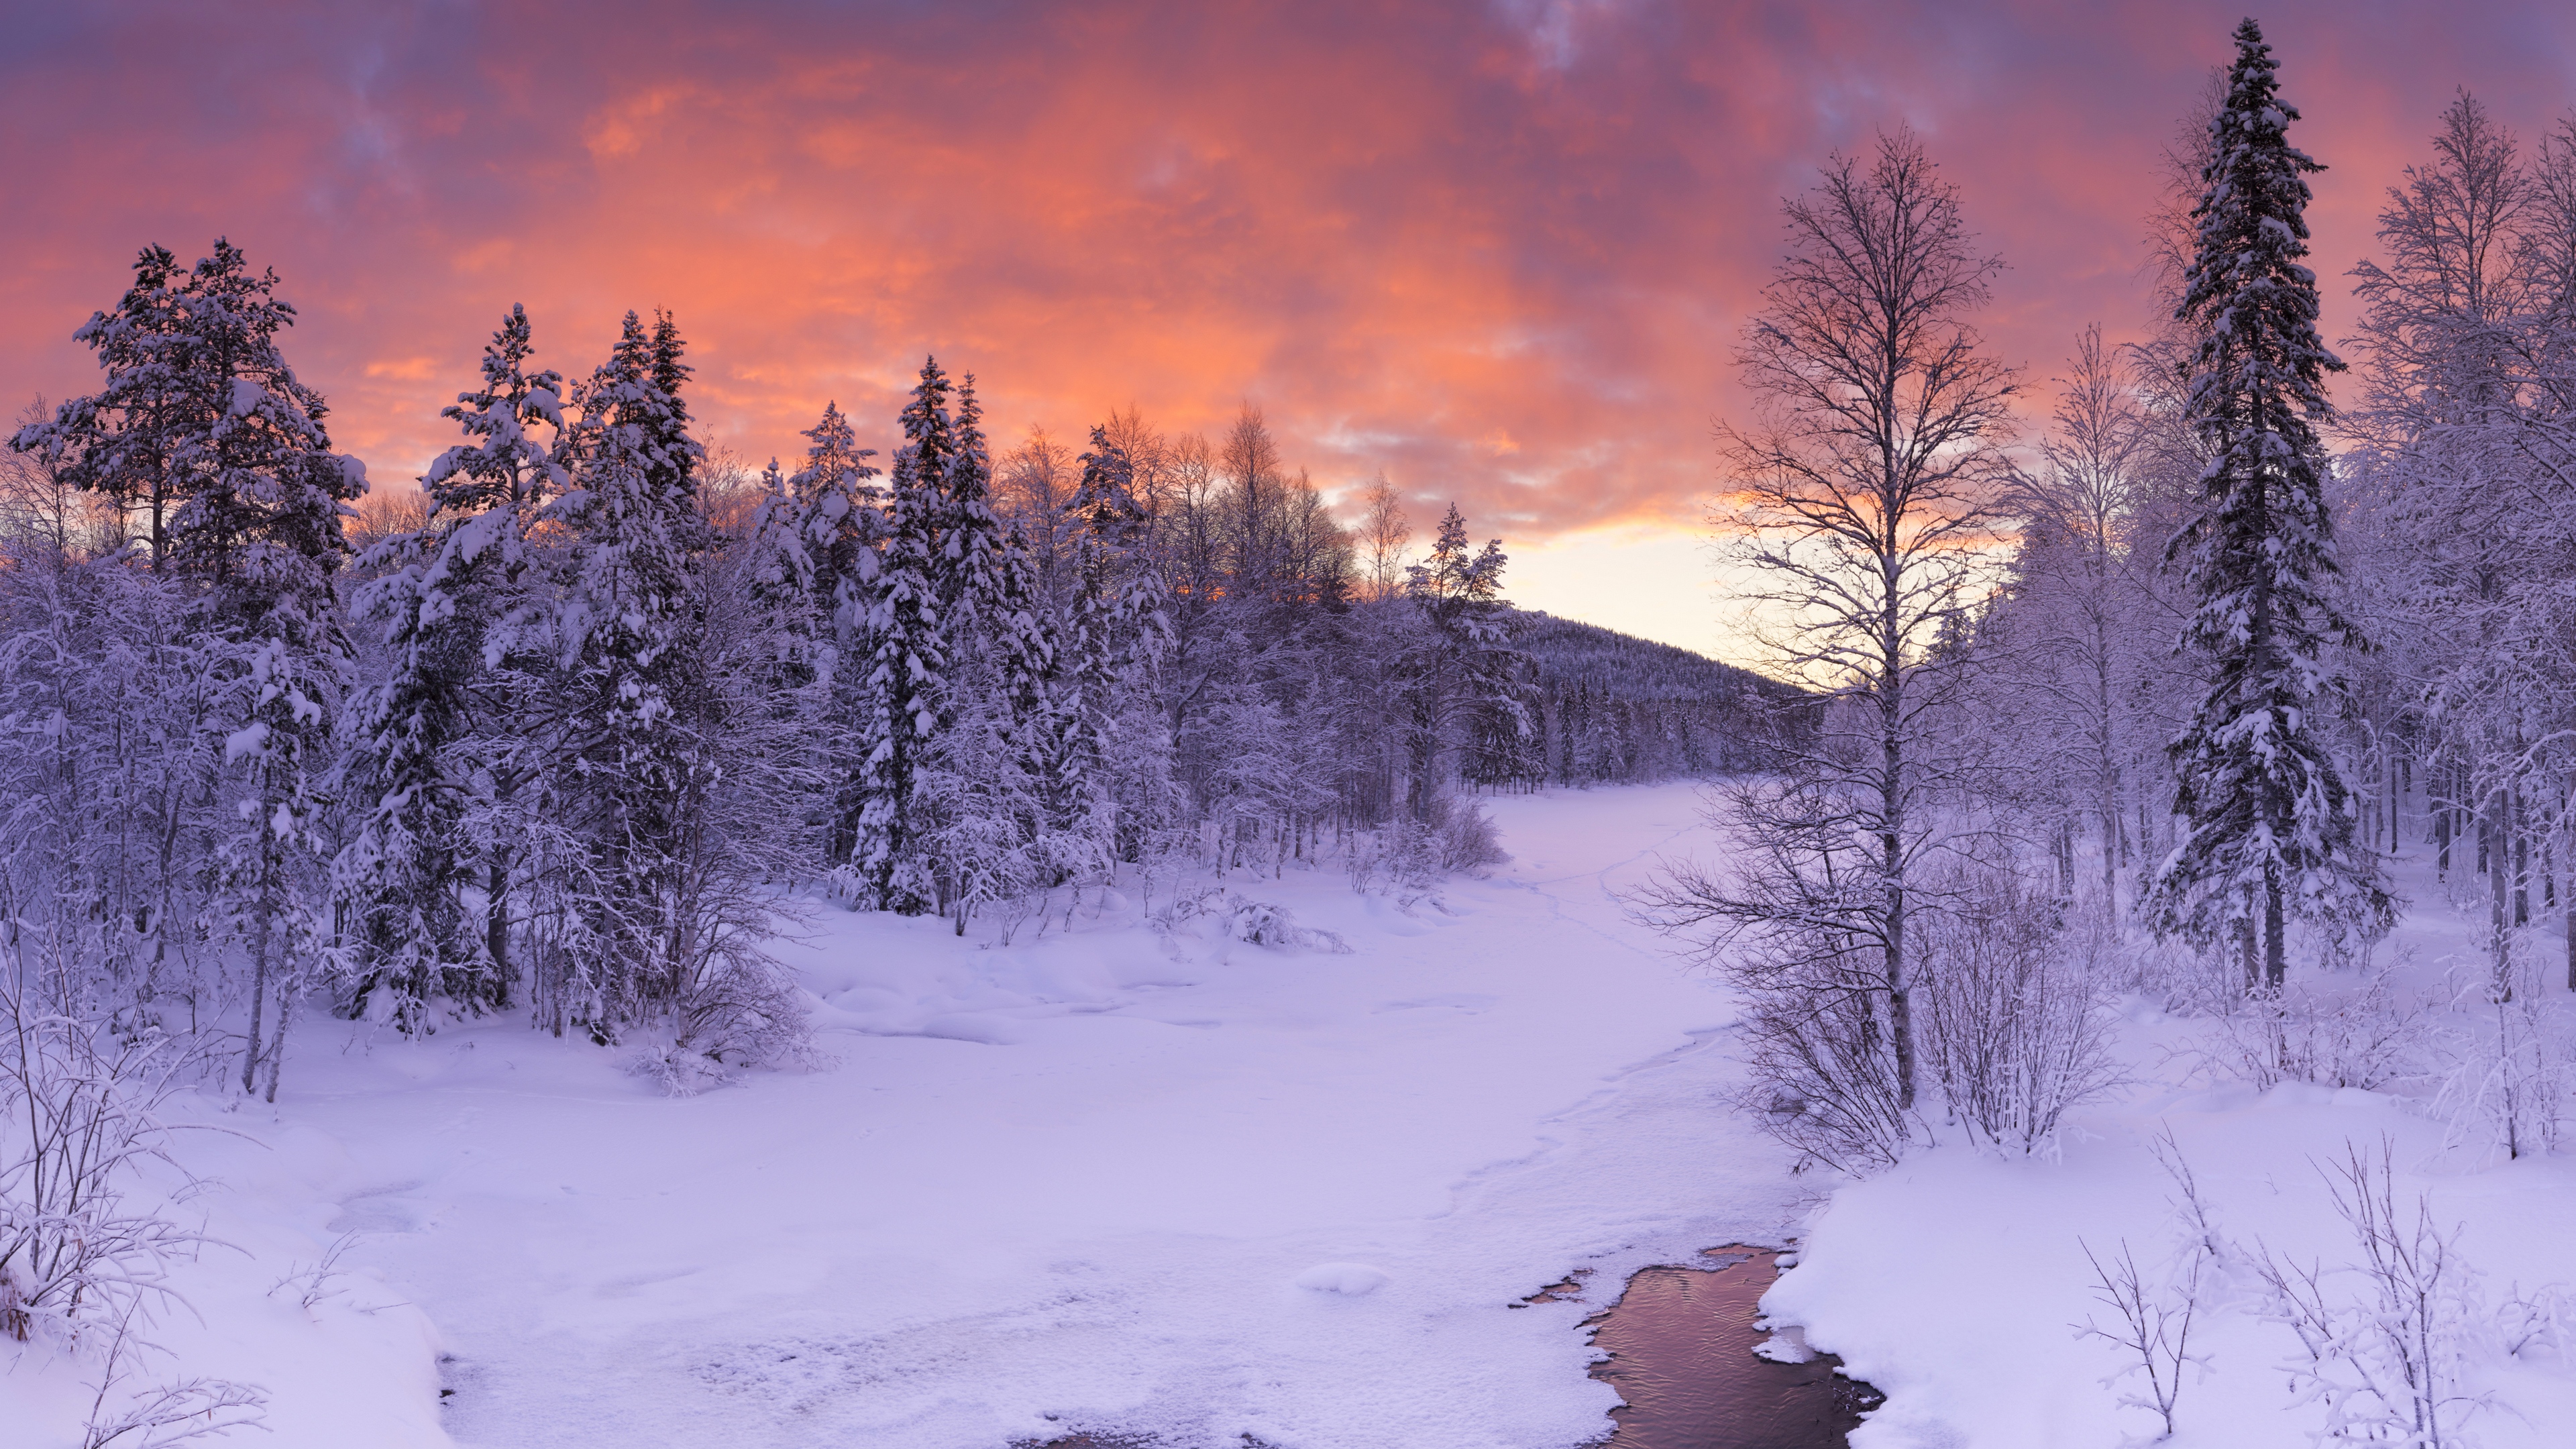 General 3840x2160 nature landscape winter snow forest Finland clouds sunset sky ice